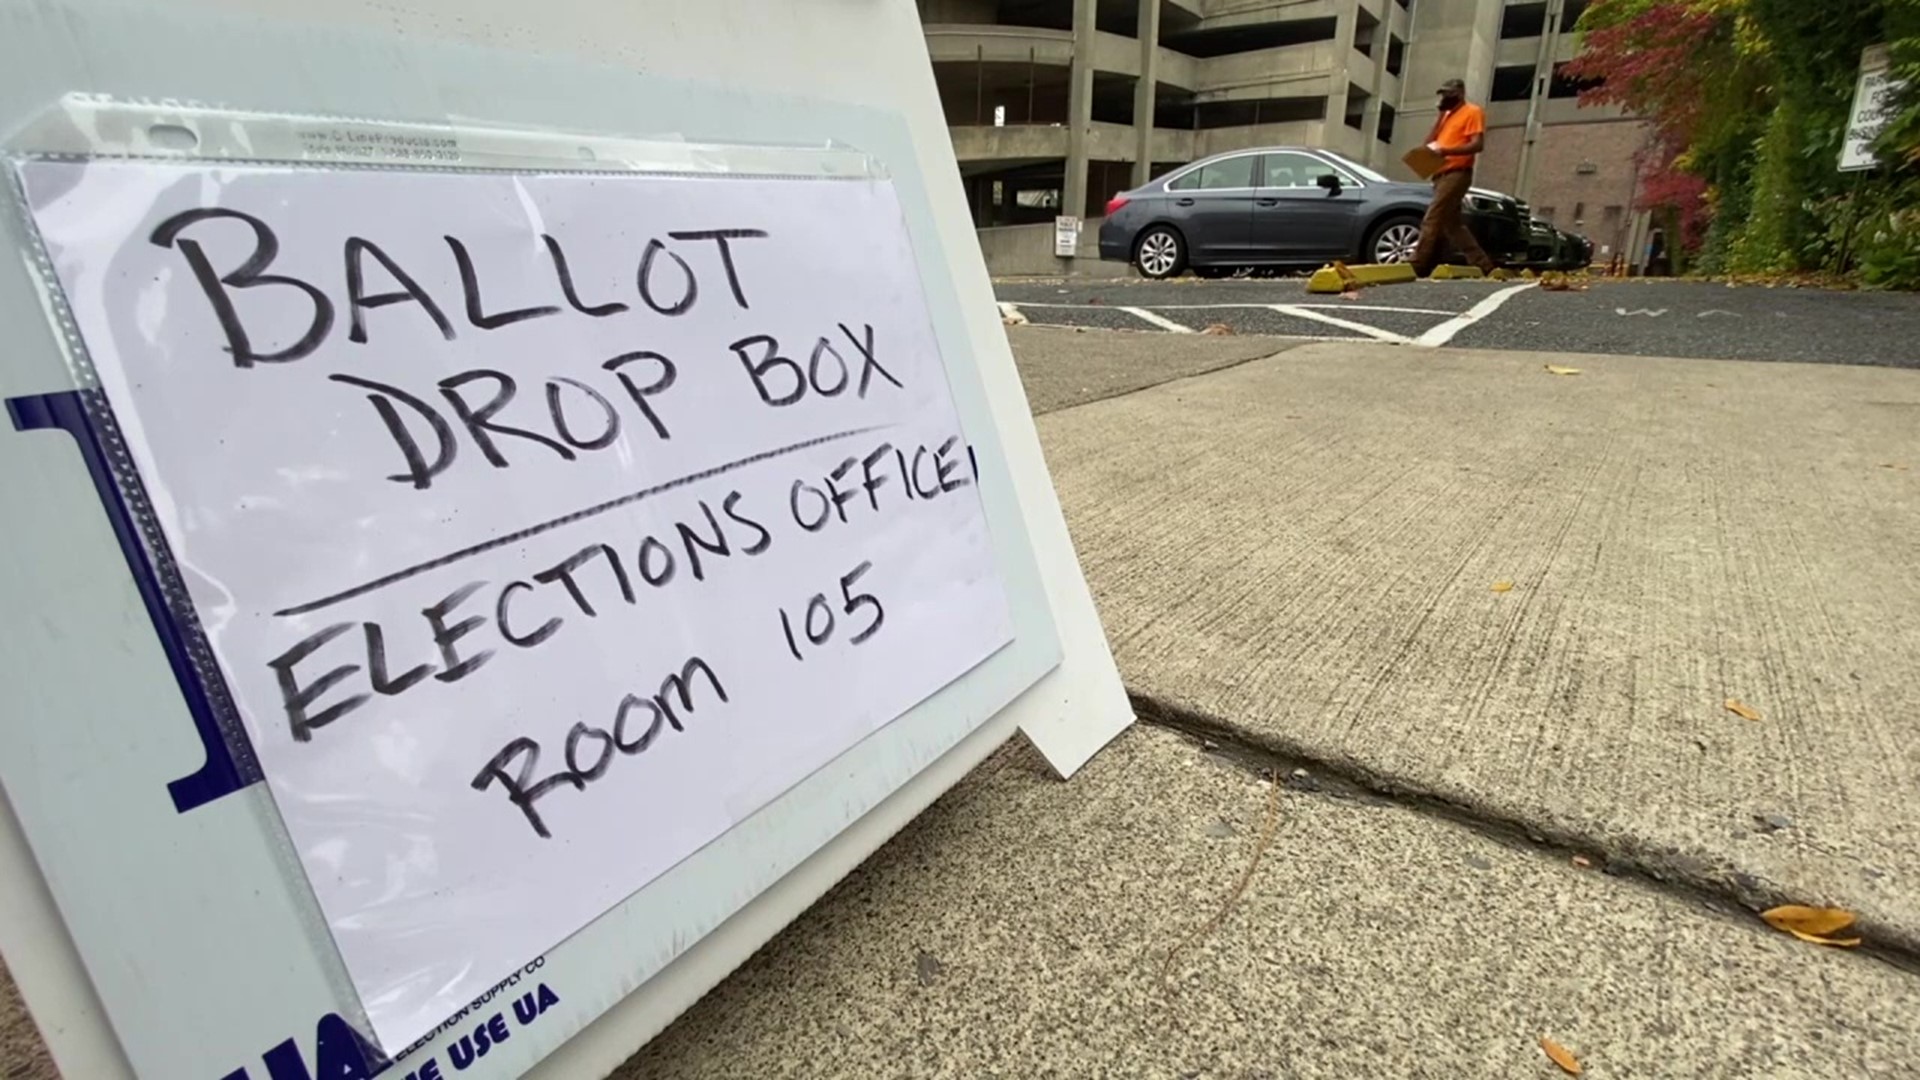 Ballot boxes are now set up in Monroe County, similar to the ones installed in Lackawanna County earlier this month.